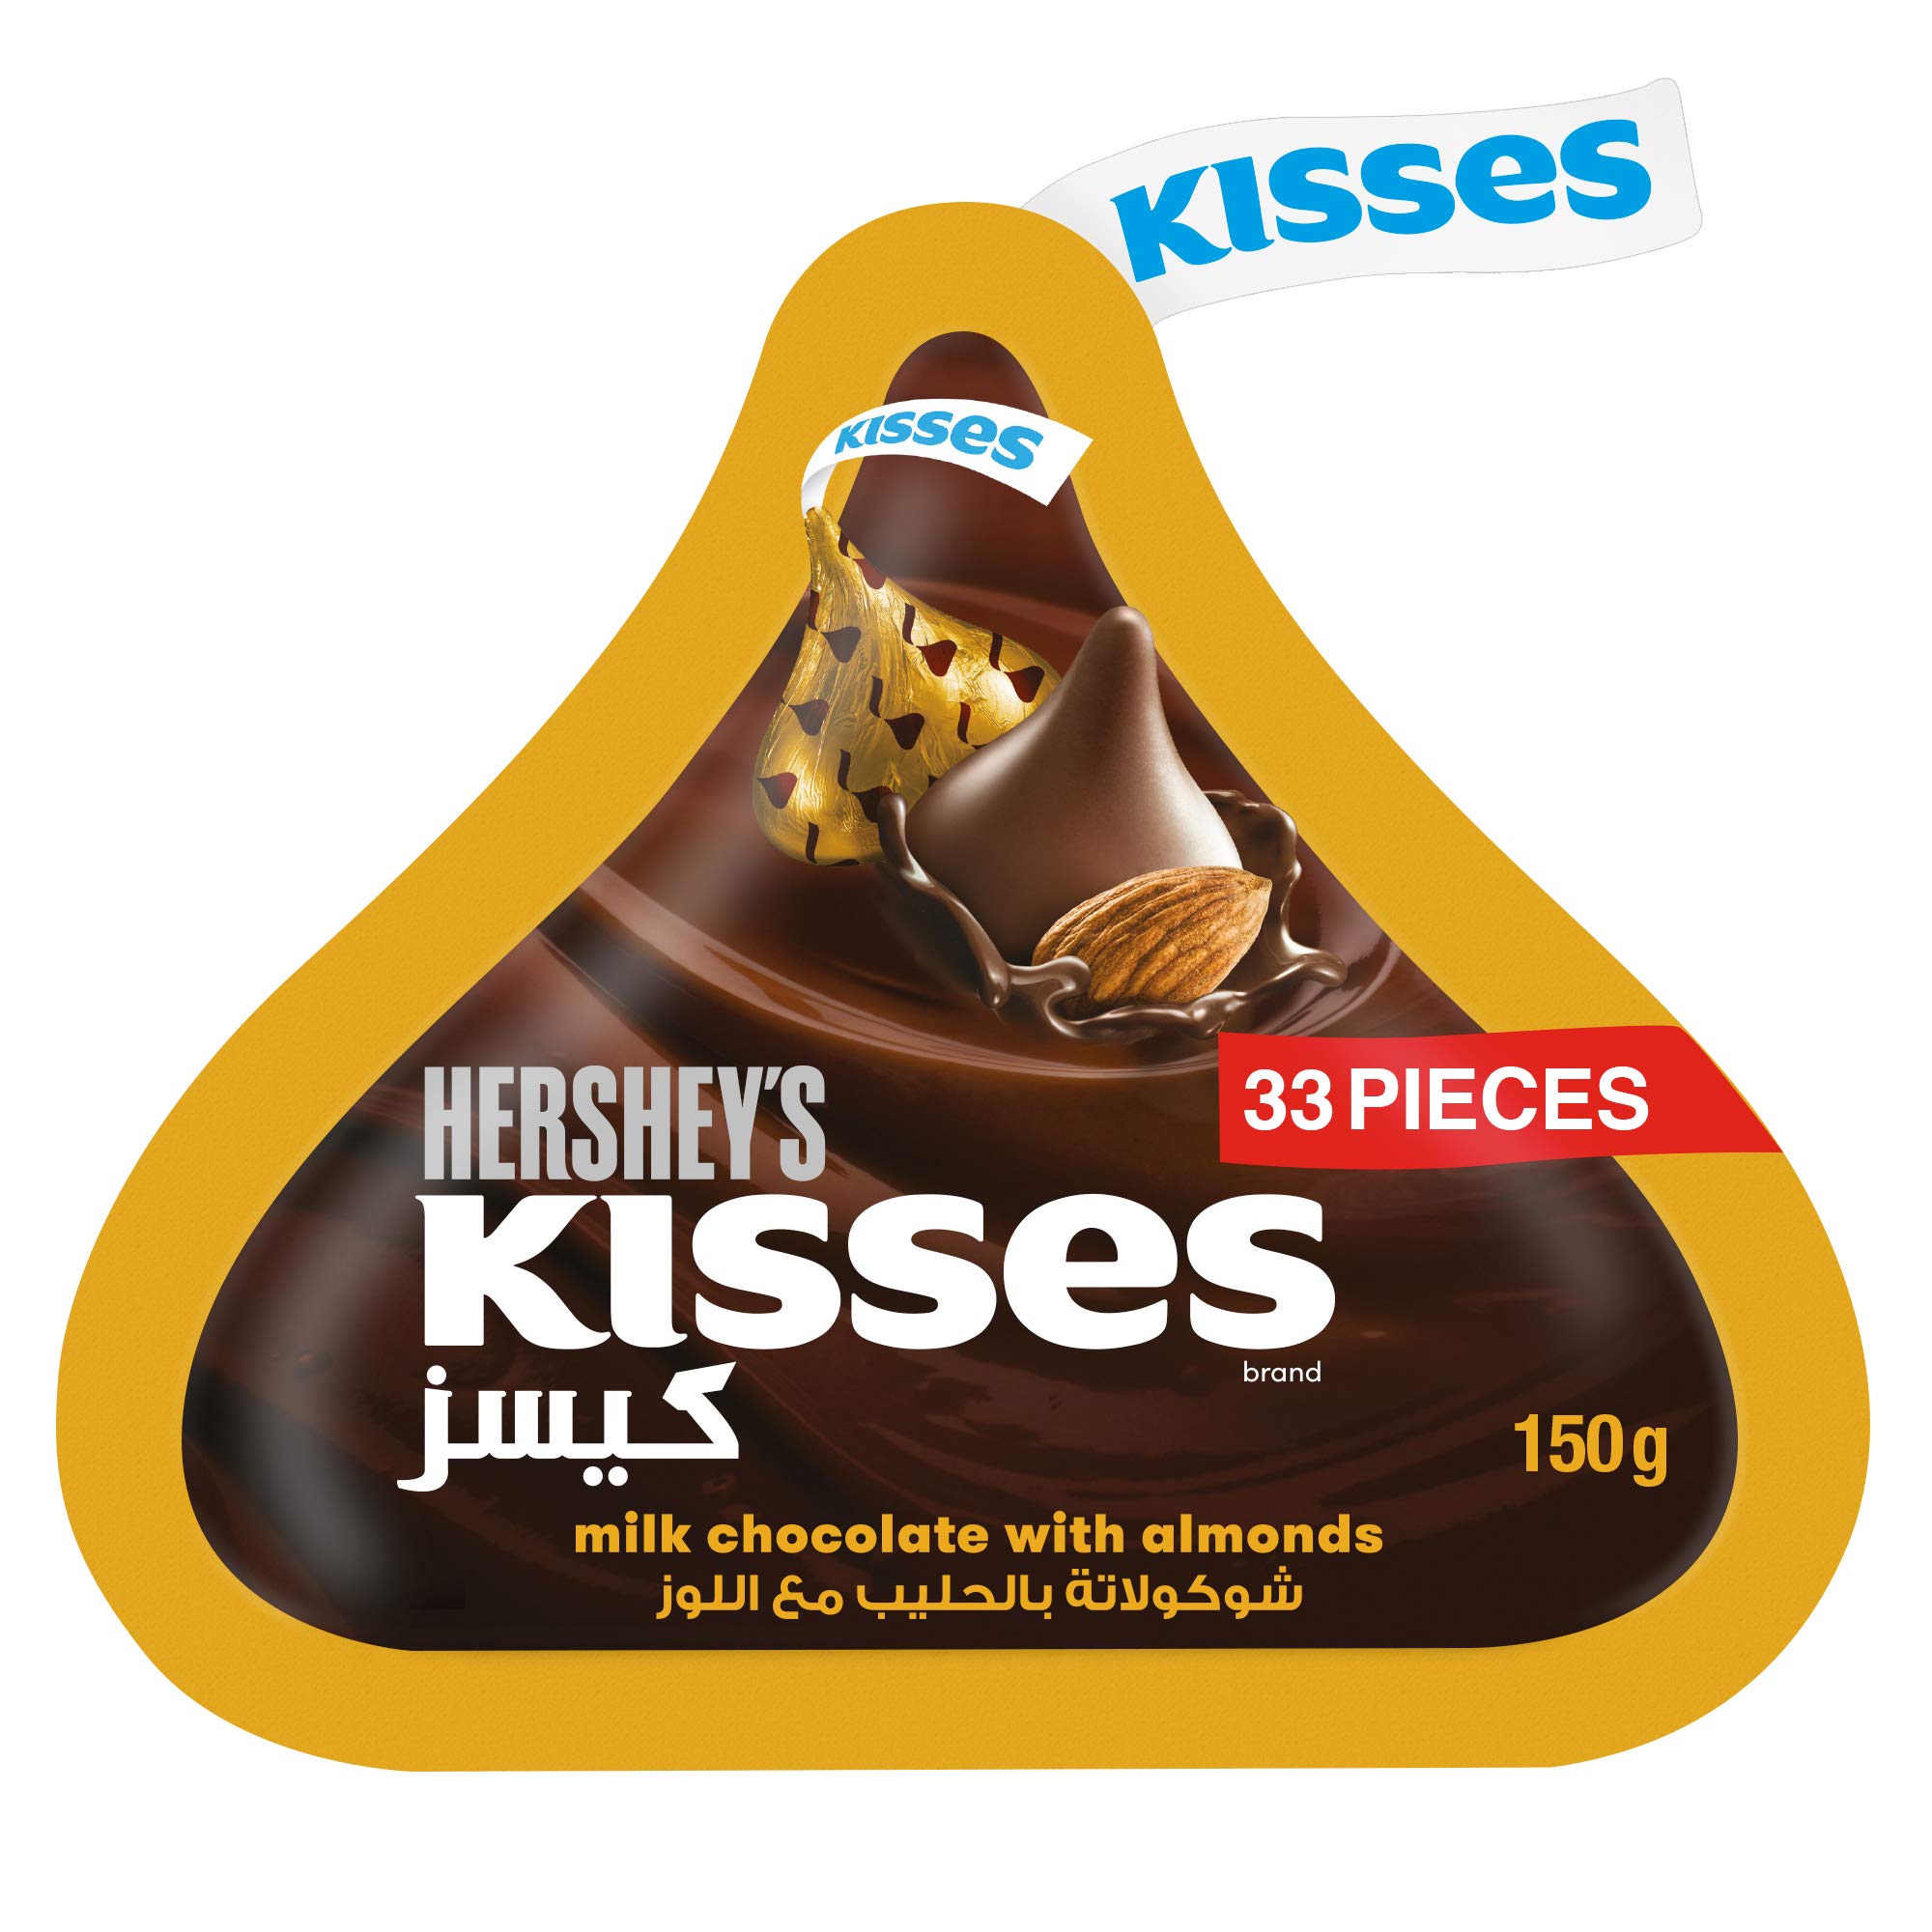 What is the nutritional value of a Hershey's Kiss?